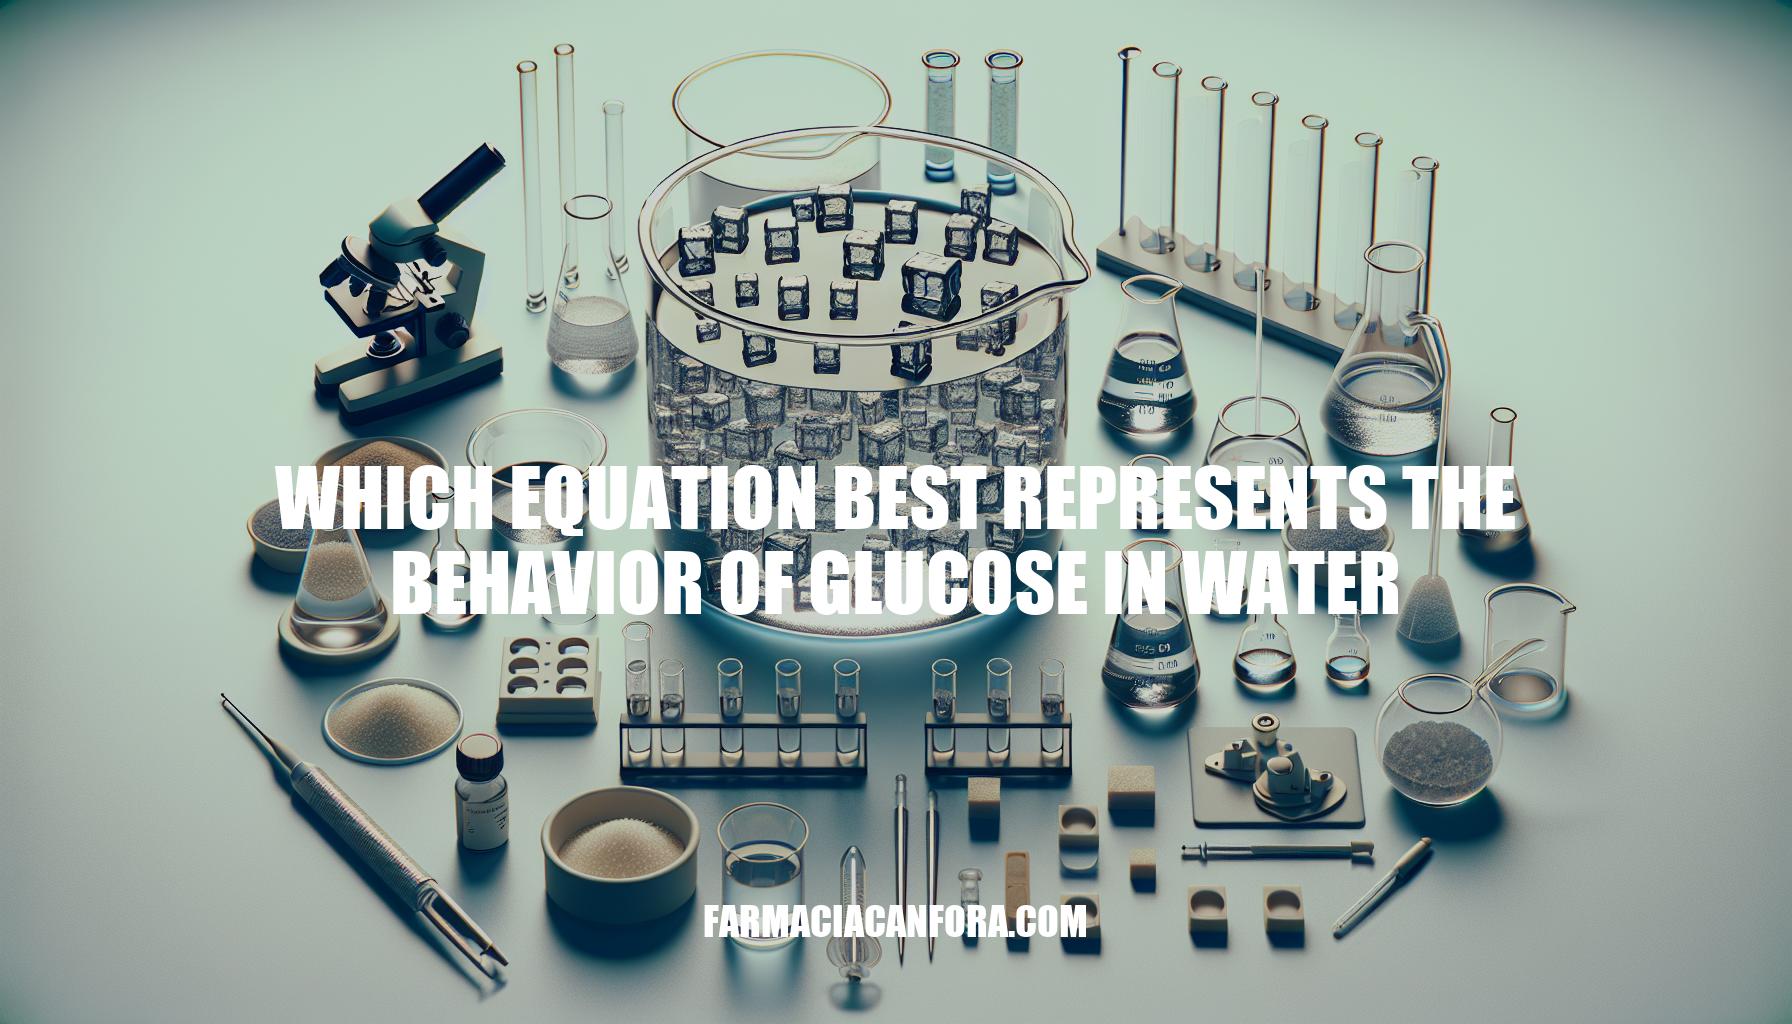 Understanding the Behavior of Glucose in Water: Equations Explained